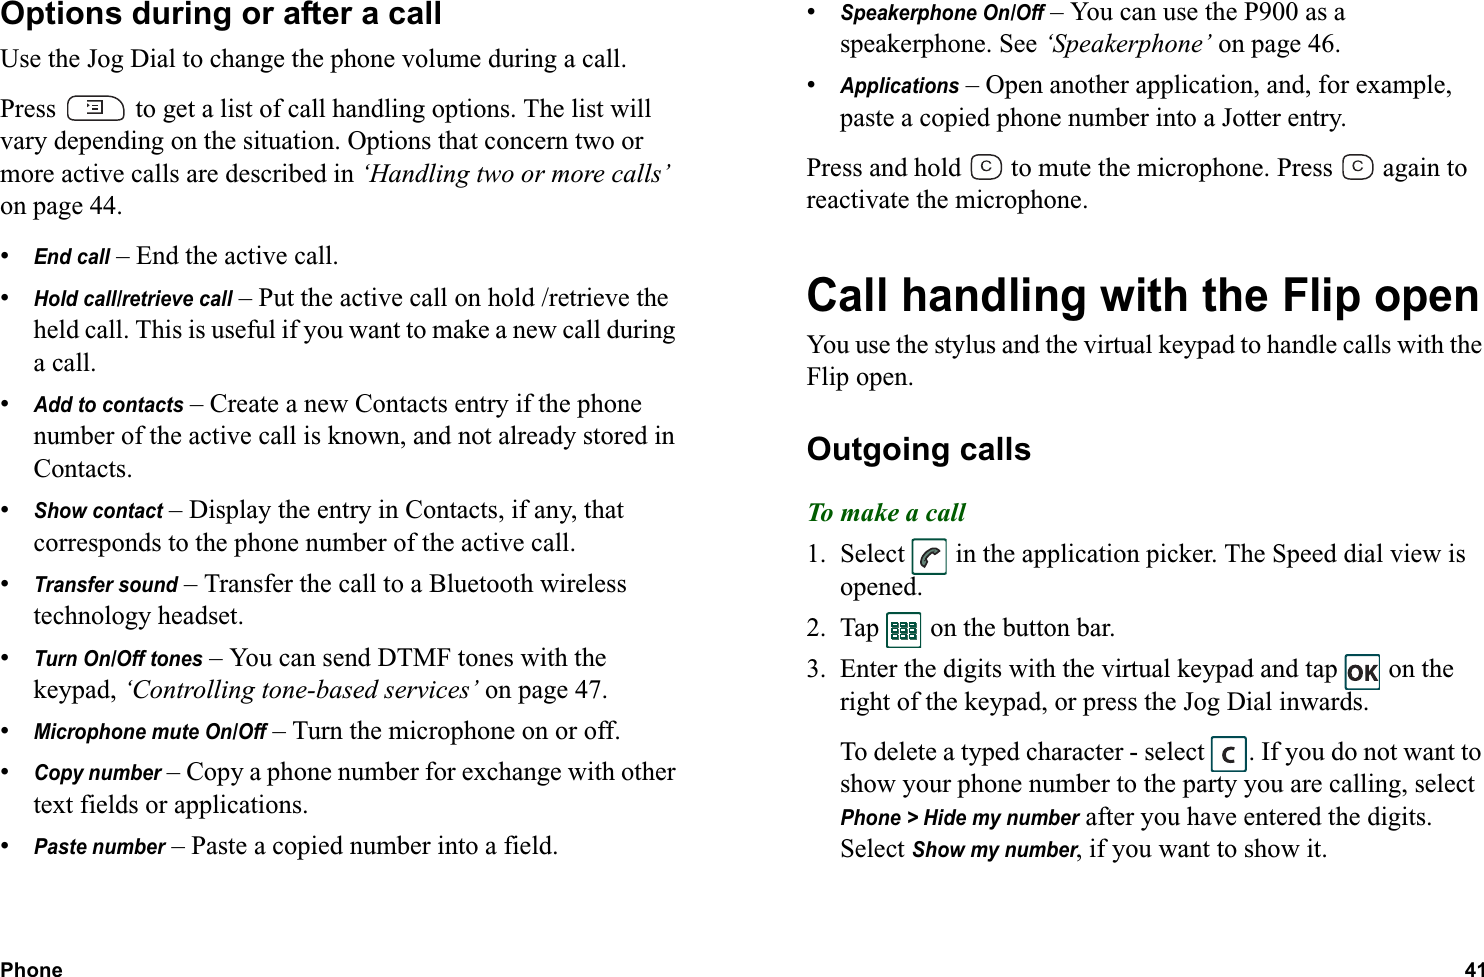 Phone 41  Options during or after a callUse the Jog Dial to change the phone volume during a call.Press   to get a list of call handling options. The list will vary depending on the situation. Options that concern two or more active calls are described in ‘Handling two or more calls’ on page 44.•End call – End the active call.•Hold call/retrieve call – Put the active call on hold /retrieve the held call. This is useful if you want to make a new call during a call.•Add to contacts – Create a new Contacts entry if the phone number of the active call is known, and not already stored in Contacts.•Show contact – Display the entry in Contacts, if any, that corresponds to the phone number of the active call.•Transfer sound – Transfer the call to a Bluetooth wireless technology headset.•Turn On/Off tones – You can send DTMF tones with the keypad, ‘Controlling tone-based services’ on page 47.•Microphone mute On/Off – Turn the microphone on or off.•Copy number – Copy a phone number for exchange with other text fields or applications.•Paste number – Paste a copied number into a field.•Speakerphone On/Off – You can use the P900 as a speakerphone. See ‘Speakerphone’ on page 46.•Applications – Open another application, and, for example, paste a copied phone number into a Jotter entry.Press and hold   to mute the microphone. Press   again to reactivate the microphone.Call handling with the Flip openYou use the stylus and the virtual keypad to handle calls with the Flip open.Outgoing callsTo make a call1. Select   in the application picker. The Speed dial view is opened.2. Tap   on the button bar.3. Enter the digits with the virtual keypad and tap   on the right of the keypad, or press the Jog Dial inwards.To delete a typed character - select  . If you do not want to show your phone number to the party you are calling, select Phone &gt; Hide my number after you have entered the digits. Select Show my number, if you want to show it.